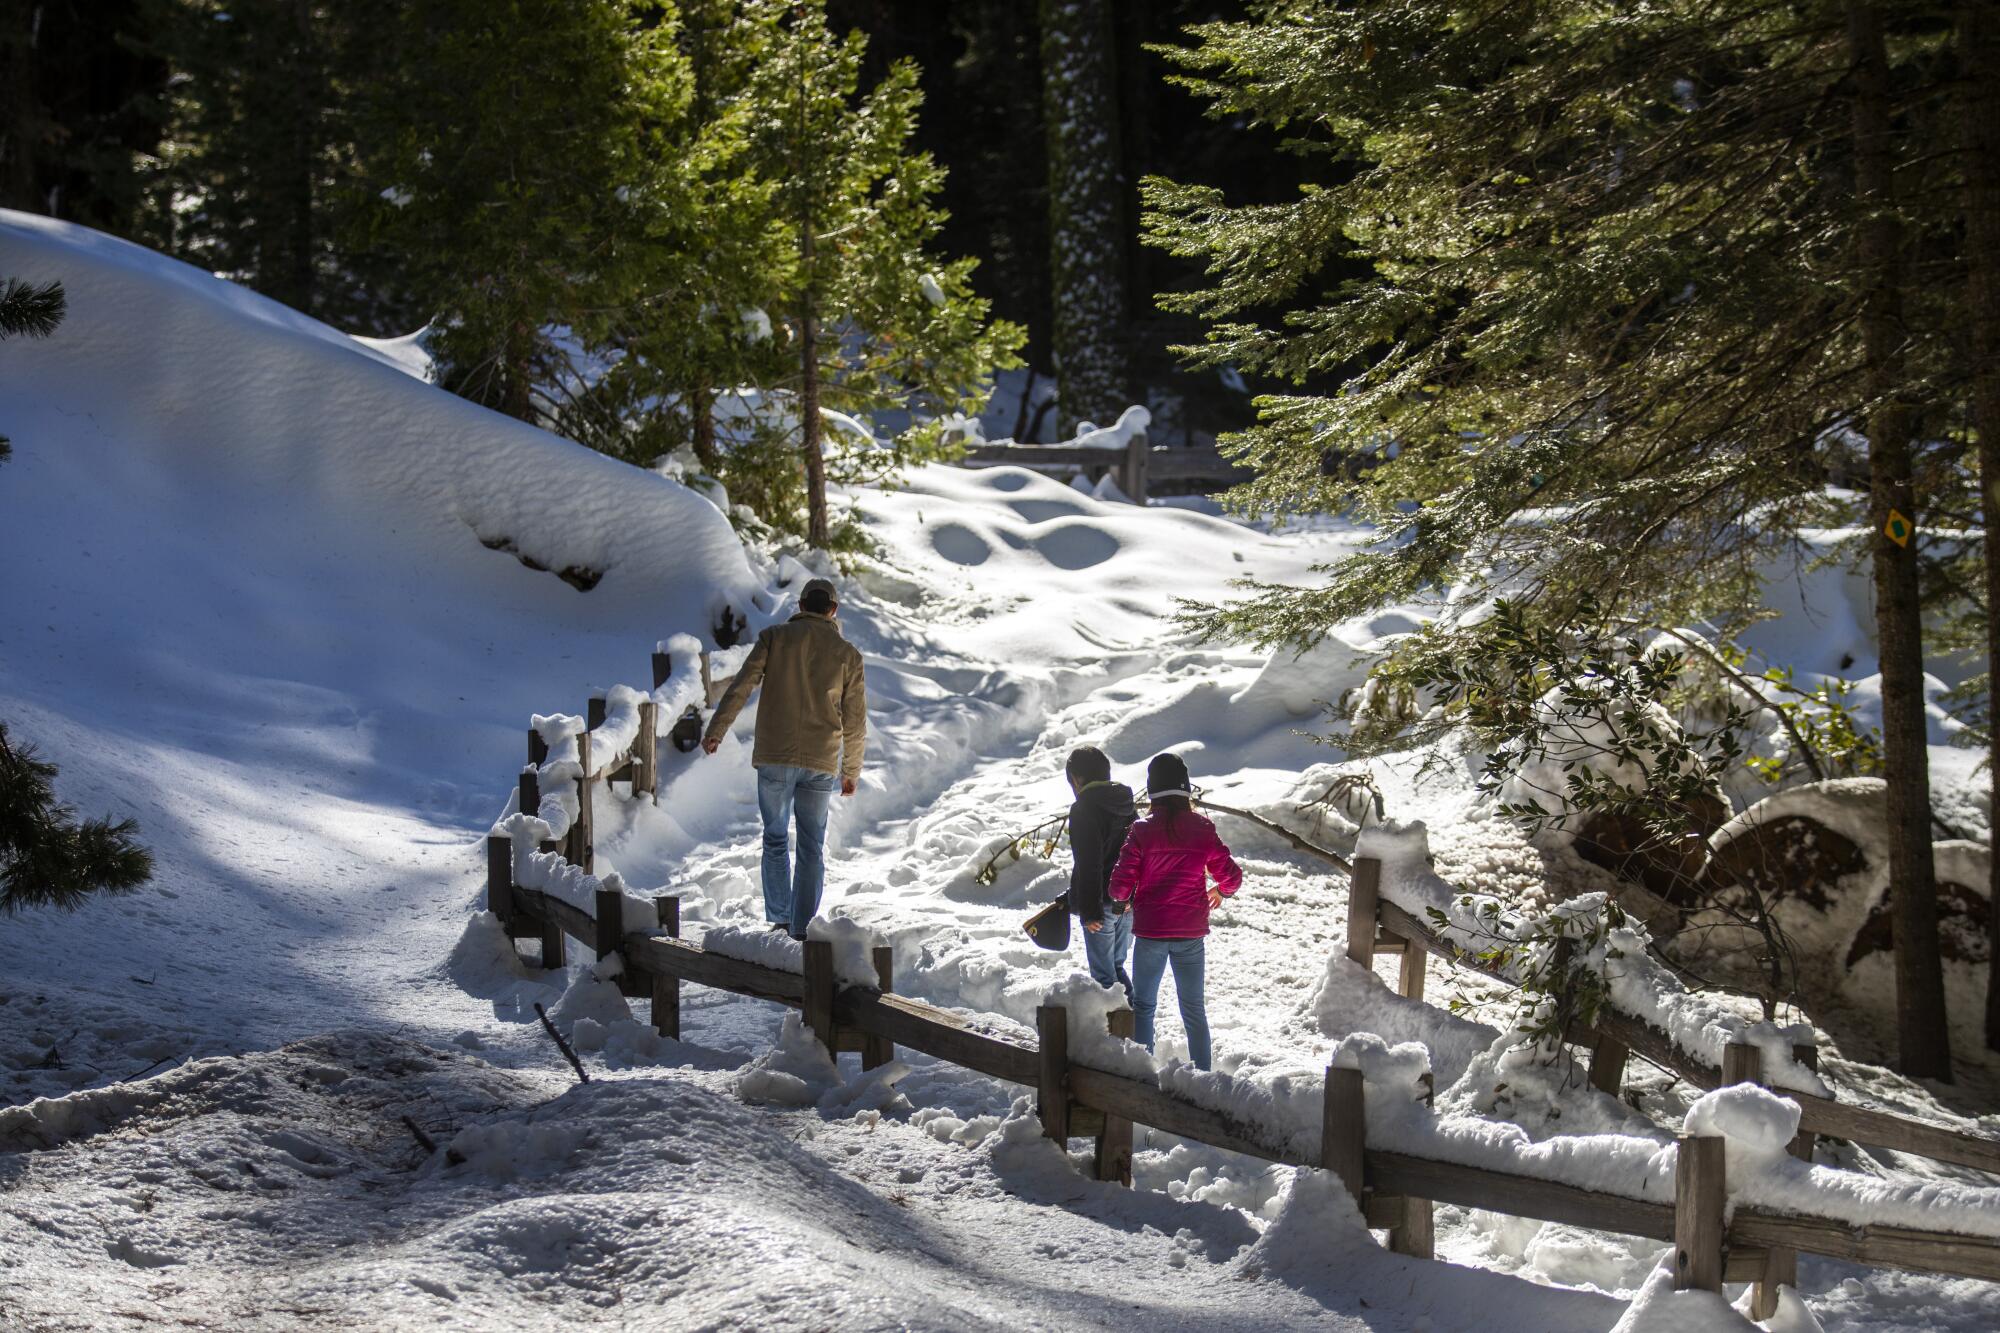 A man and two children walk a snow-covered trail lined by evergreens.